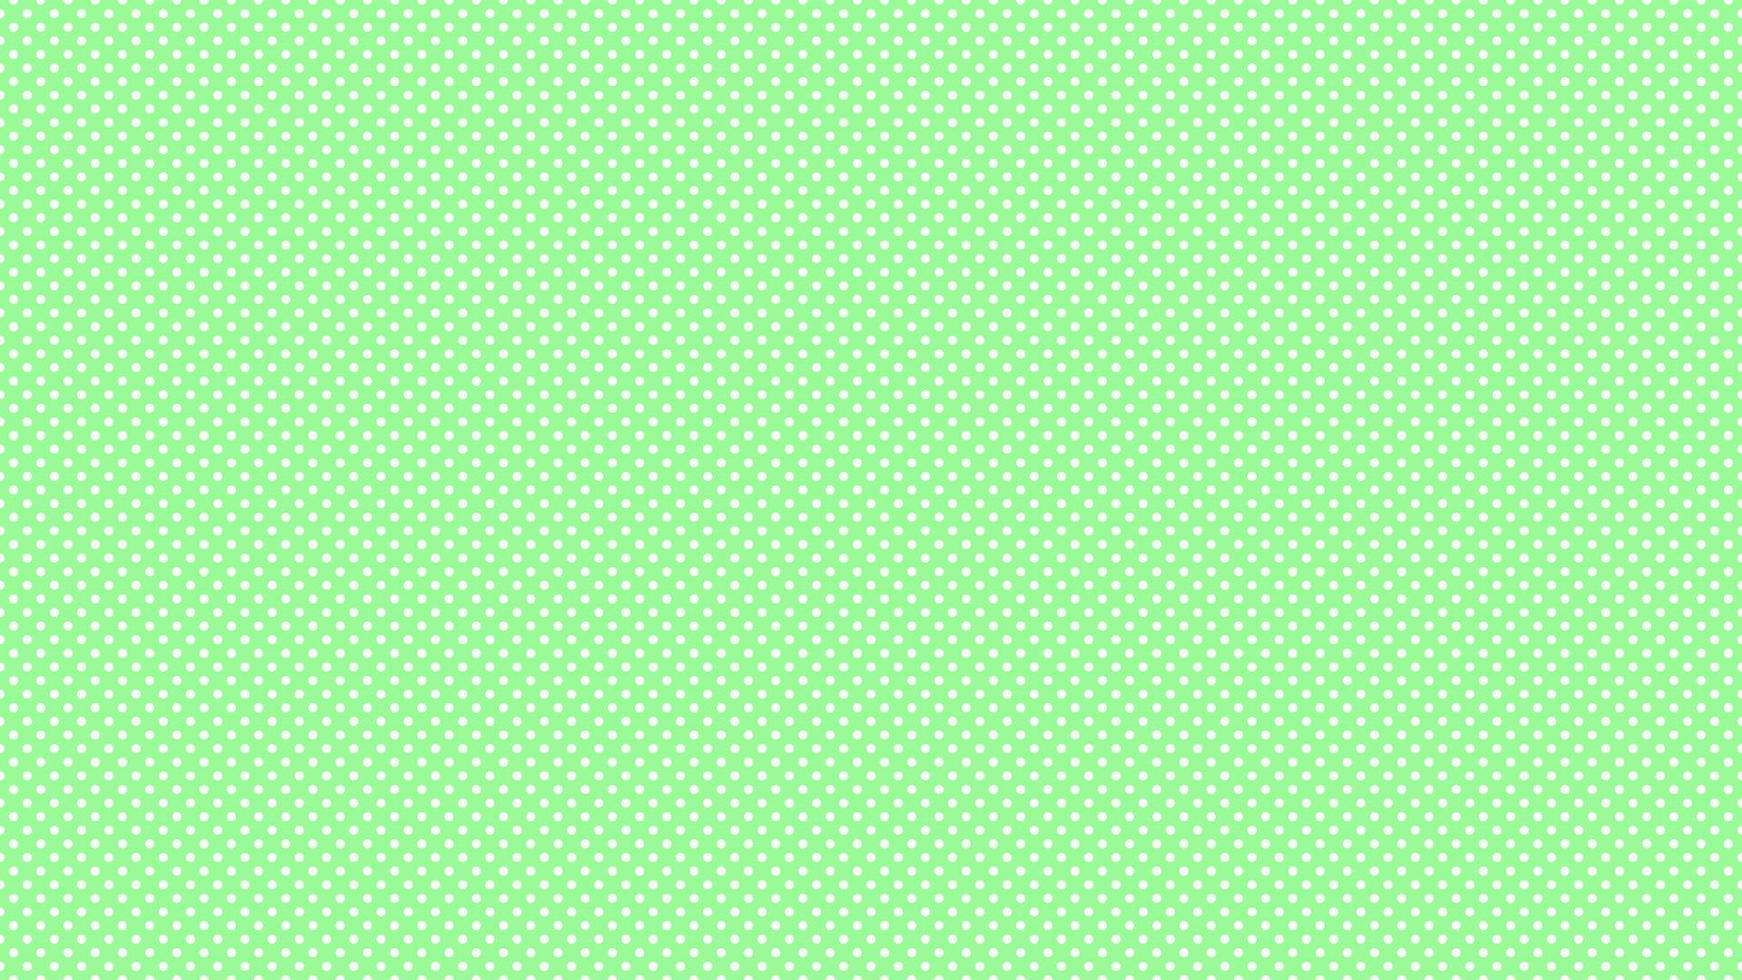 white color polka dots over pale green background vector